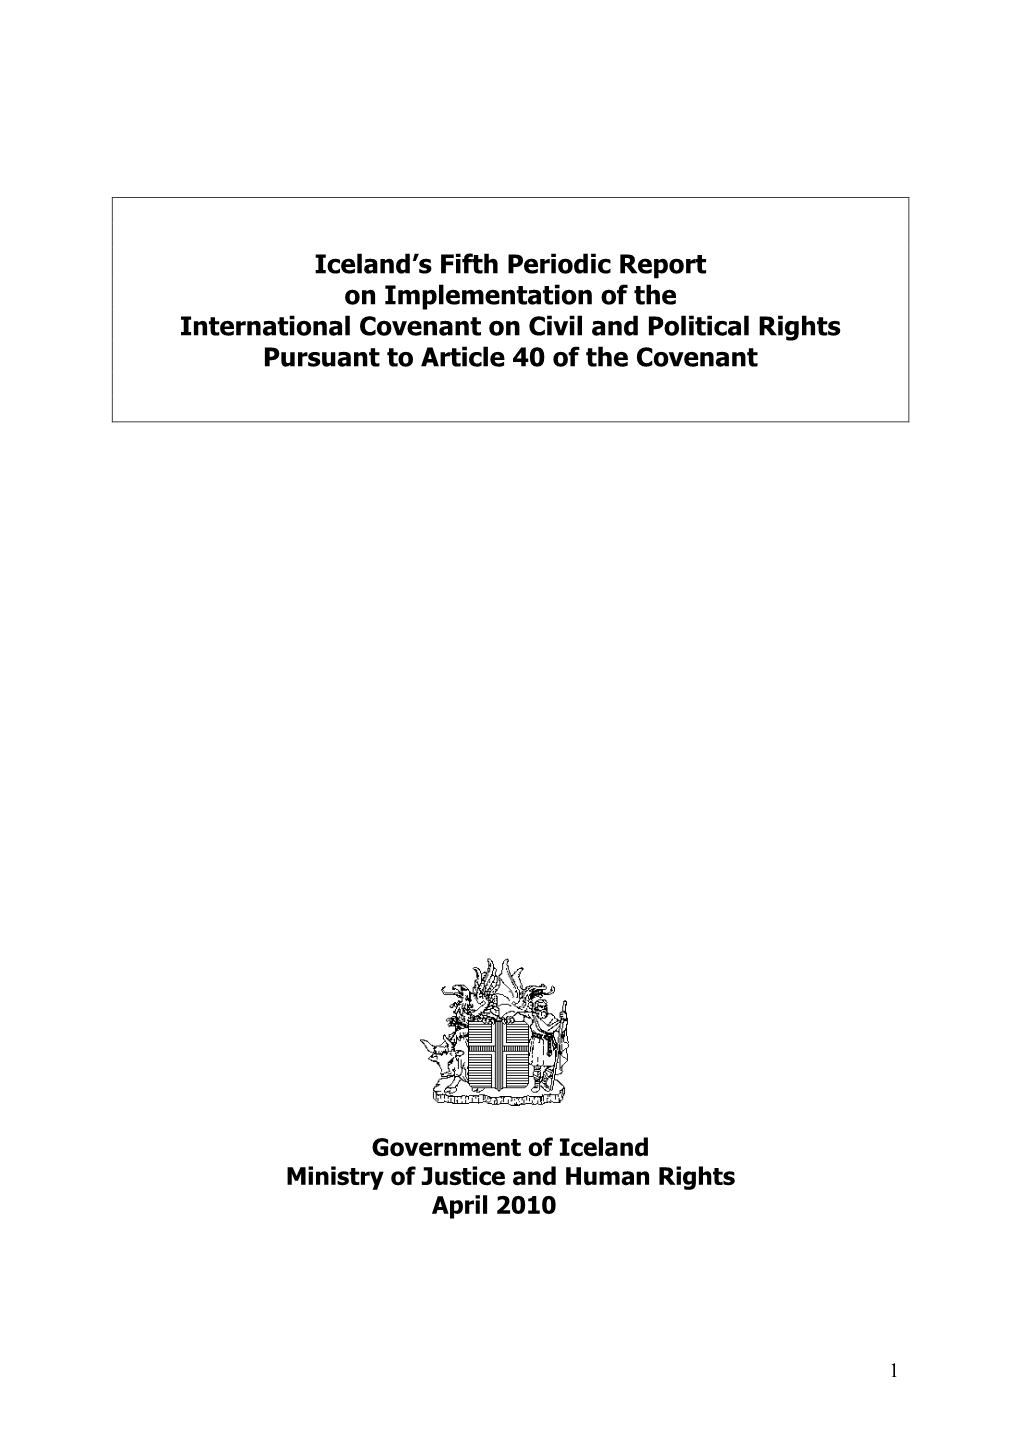 Iceland's Fifth Periodic Report on Implementation of the International